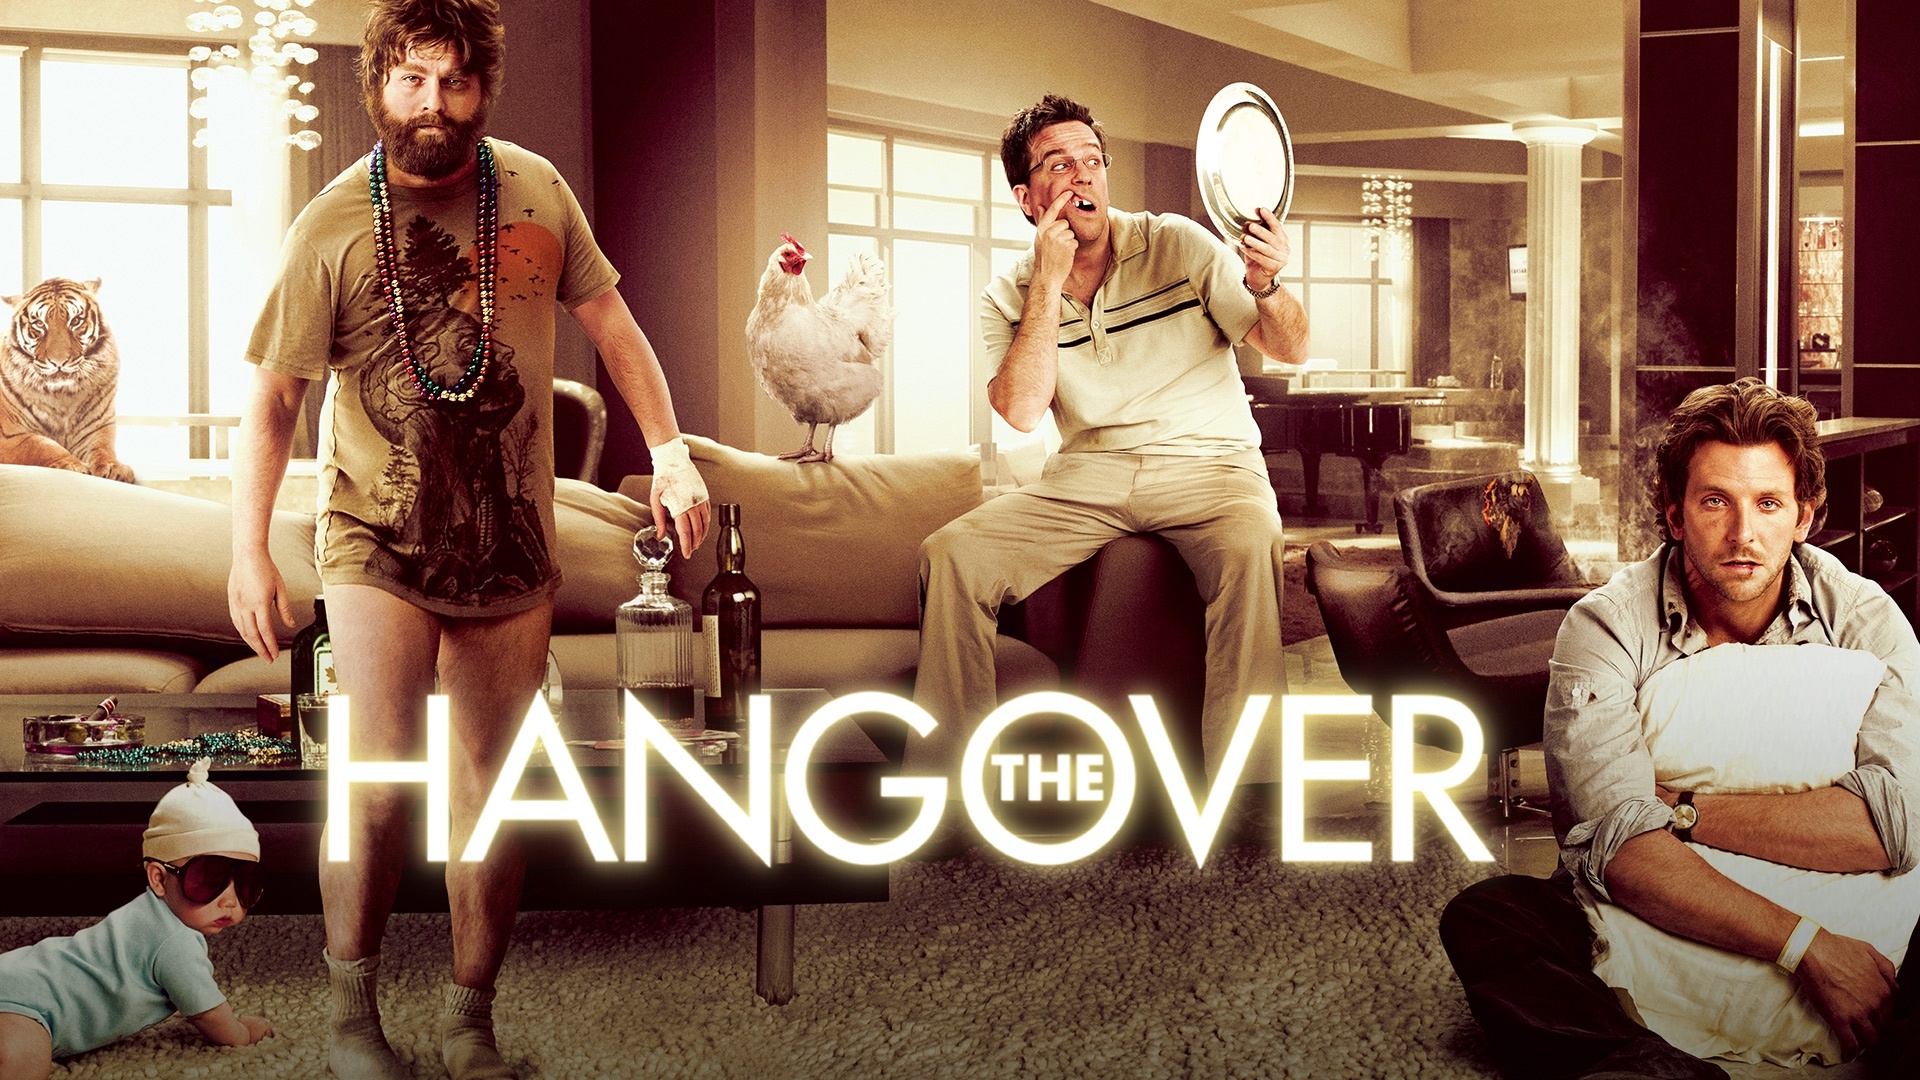 The Hangover: Hollywood's most destructive stag-party trip to Las Vegas, Comedy. 1920x1080 Full HD Wallpaper.